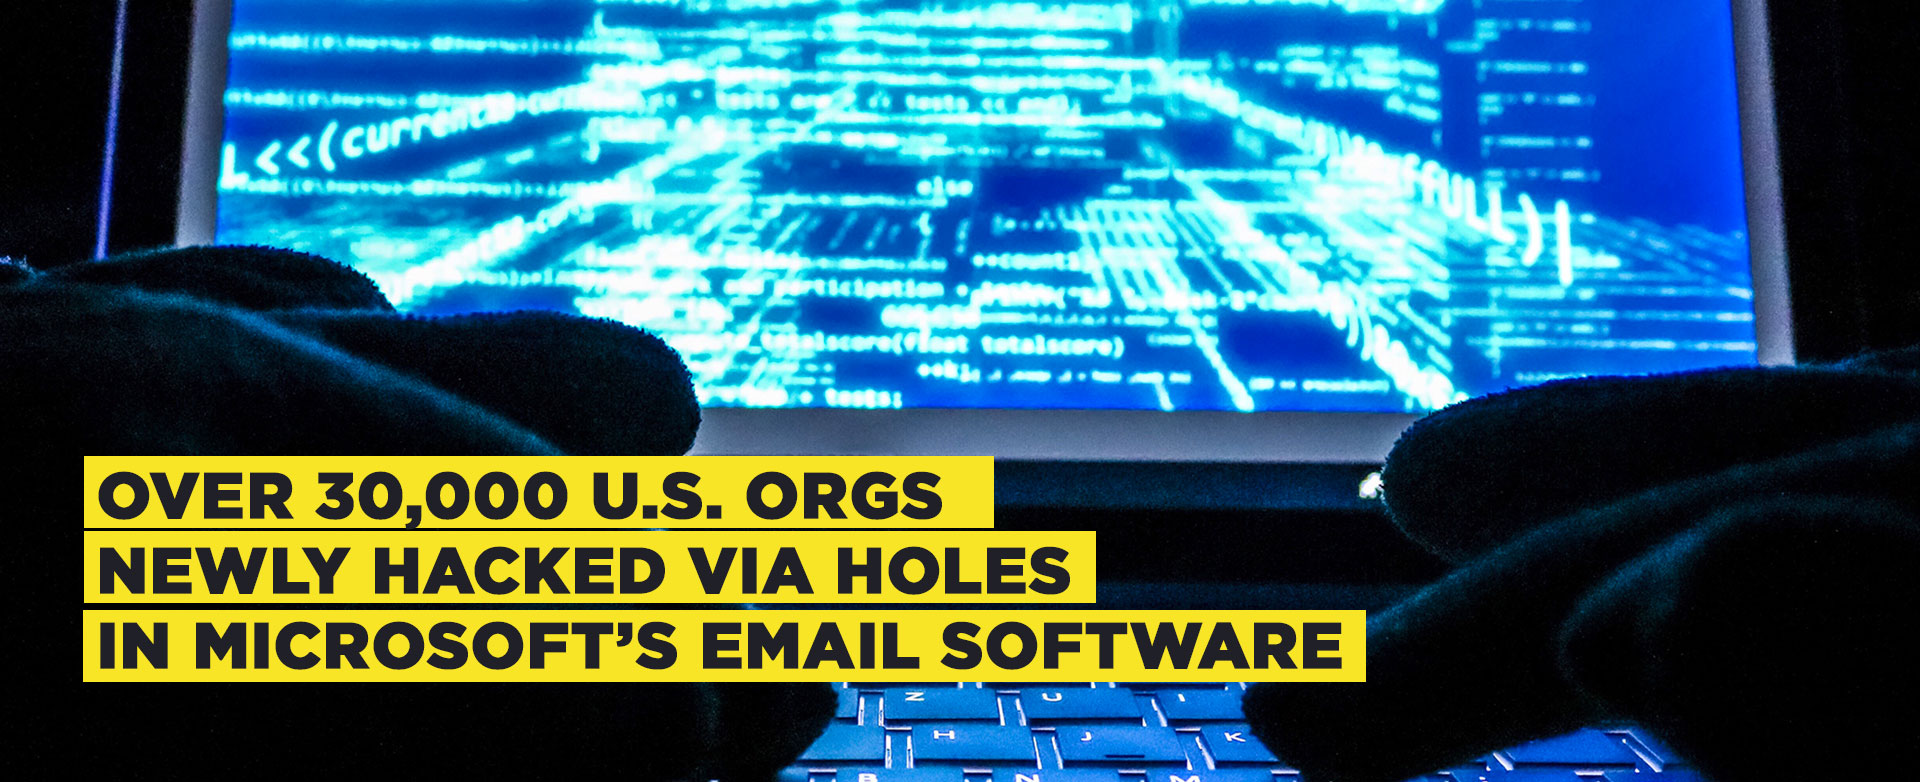 MyPatriotsNetwork-Over 30,000 U.S. Organizations Newly Hacked Via Holes in Microsoft’s Email Software